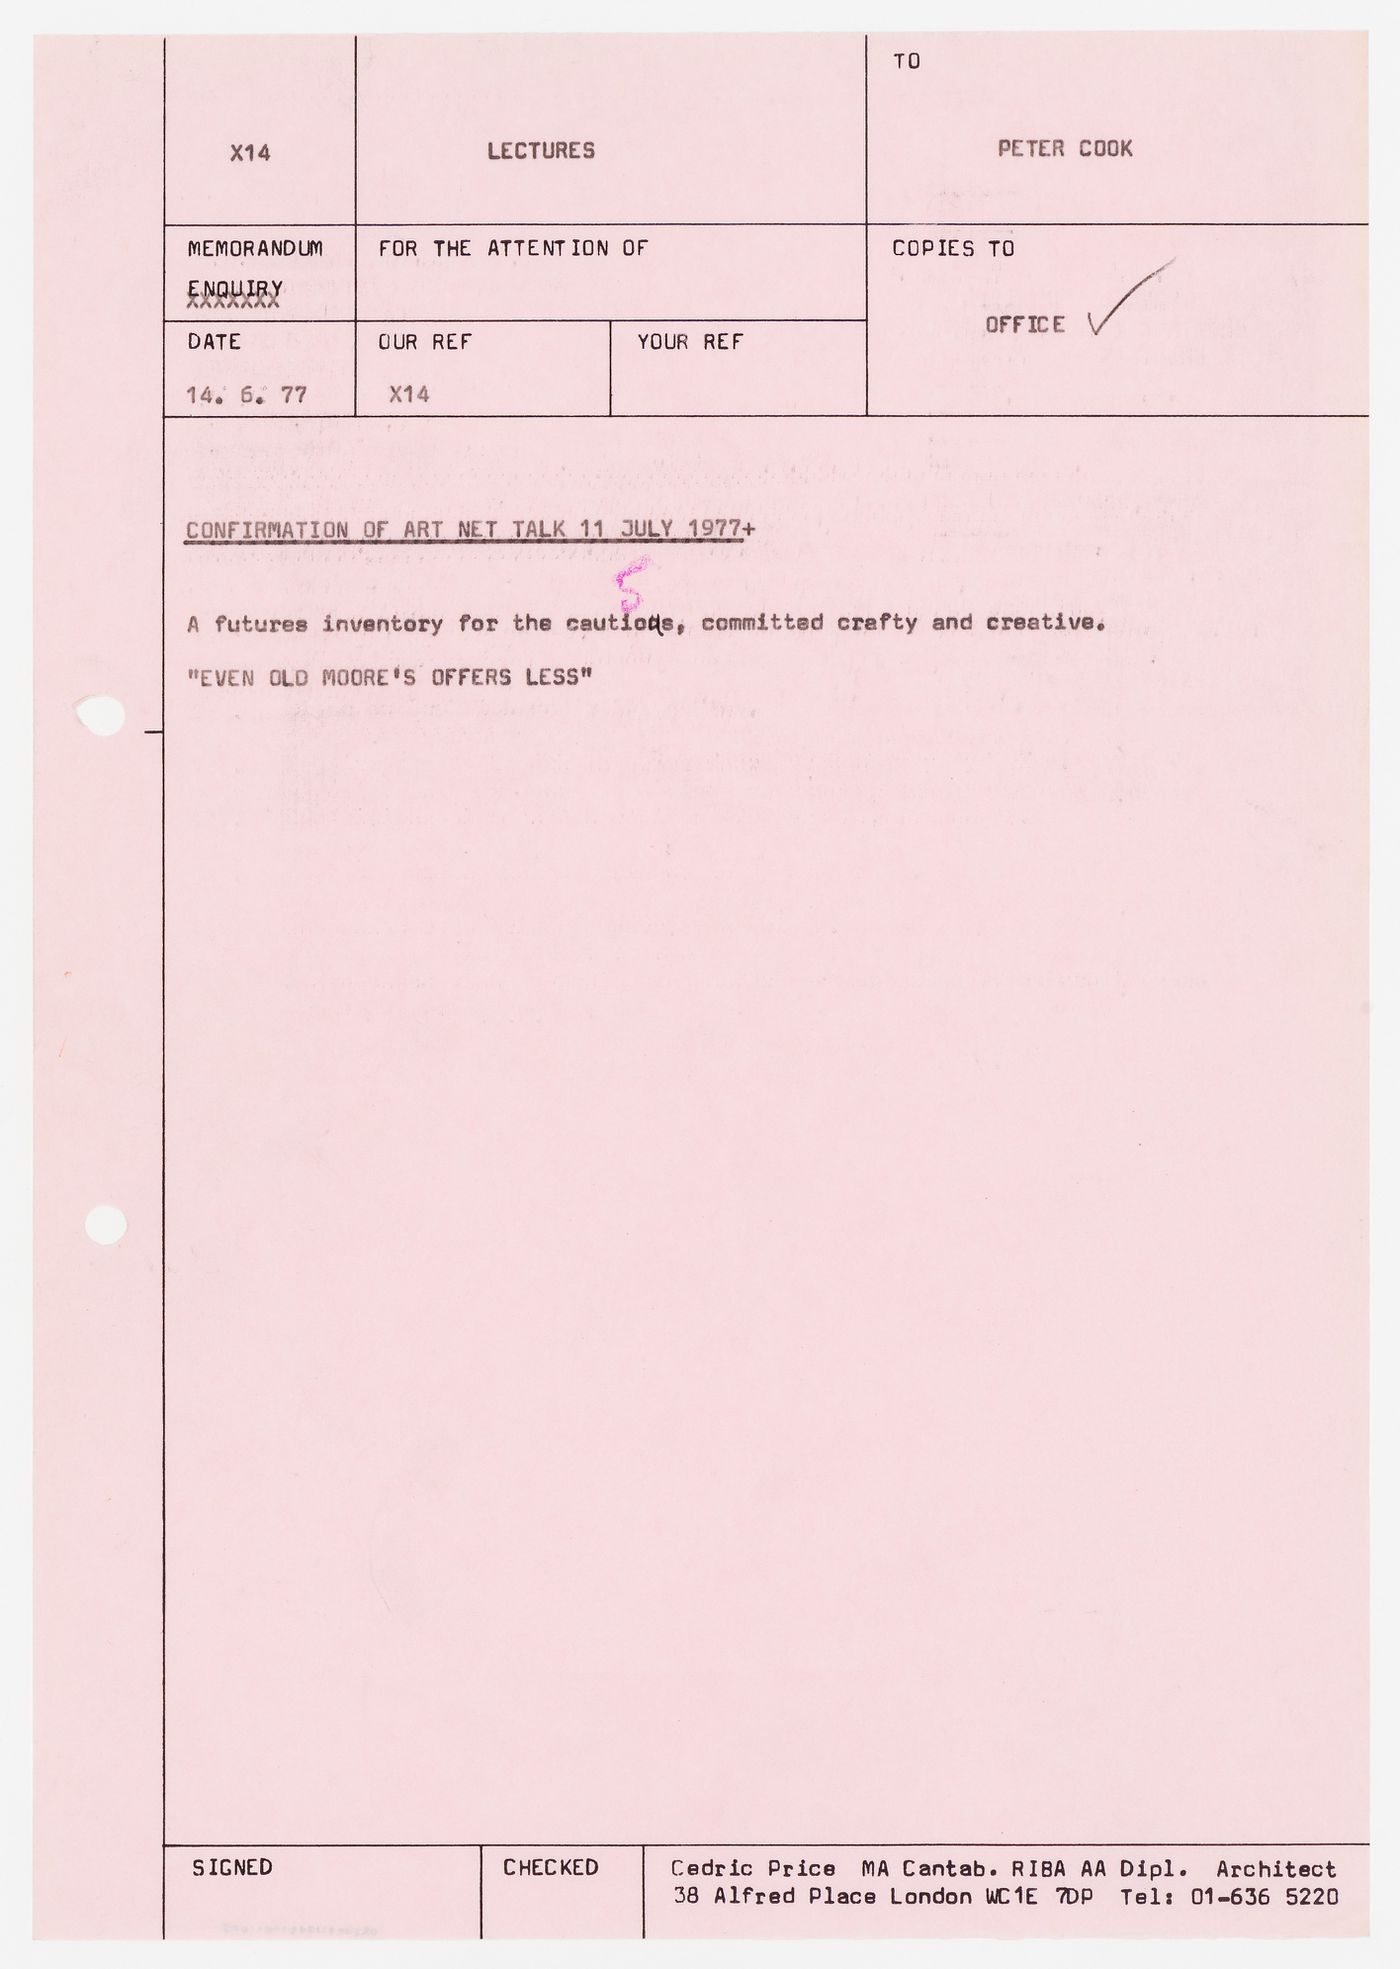 Memorandum to Peter Cook about a lecture to be presented at Art Net, London, England, July 11, 1977